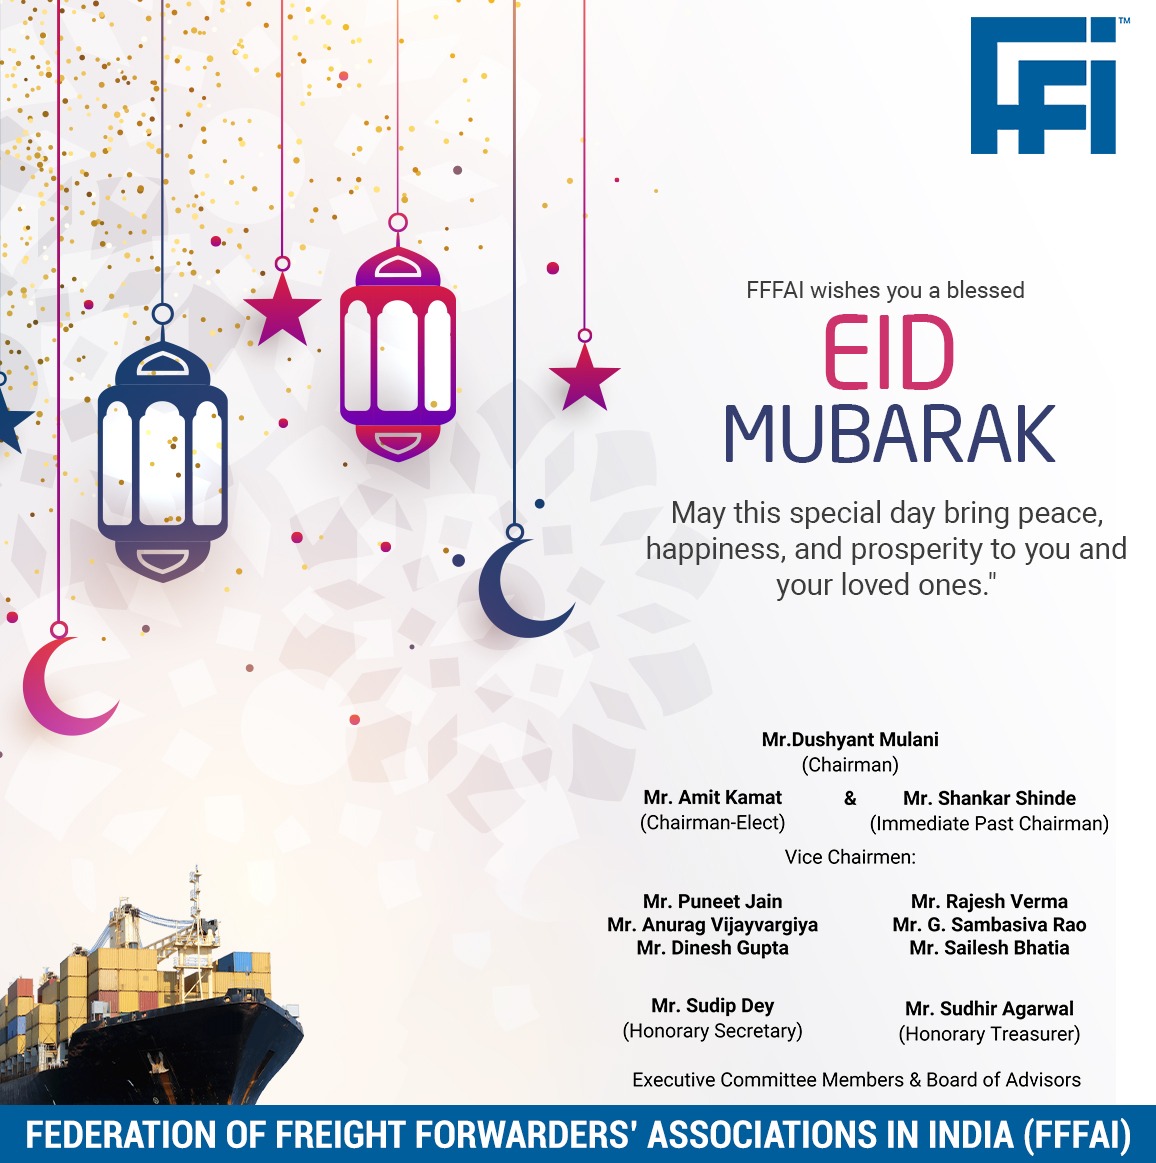 FFFAI wishes you a blessed 'Eid Mubarak! May this special day bring peace, happiness, and prosperity to you and your loved ones.'
.
.
.
.
#FFFAI #eidmubarak #eid #eid2024 #Cargo #Logistics #Customs #FreightForwarders #supplychain